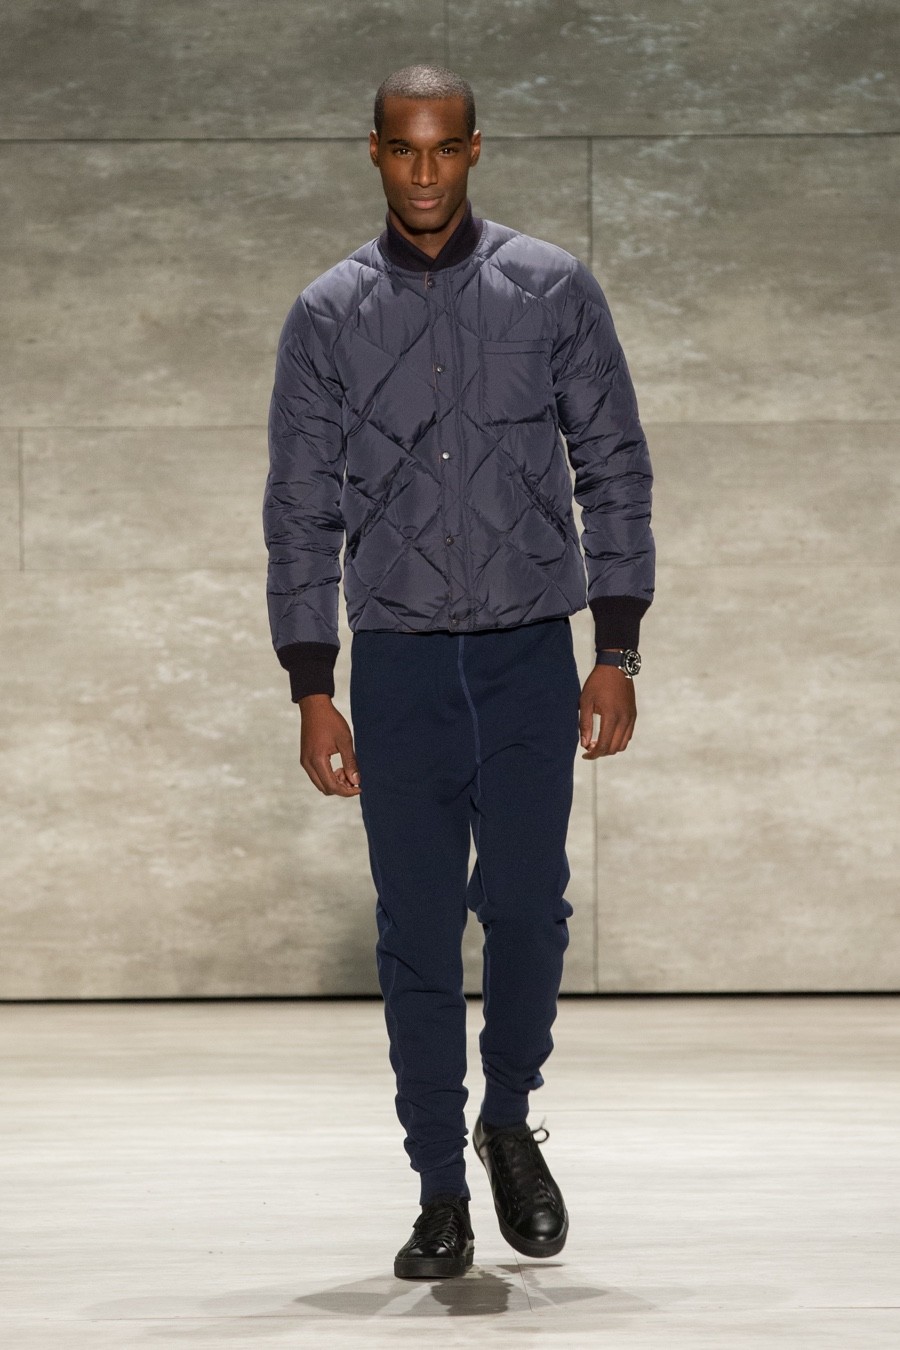 Todd Snyder Fall Winter 2015 Menswear Collection 026